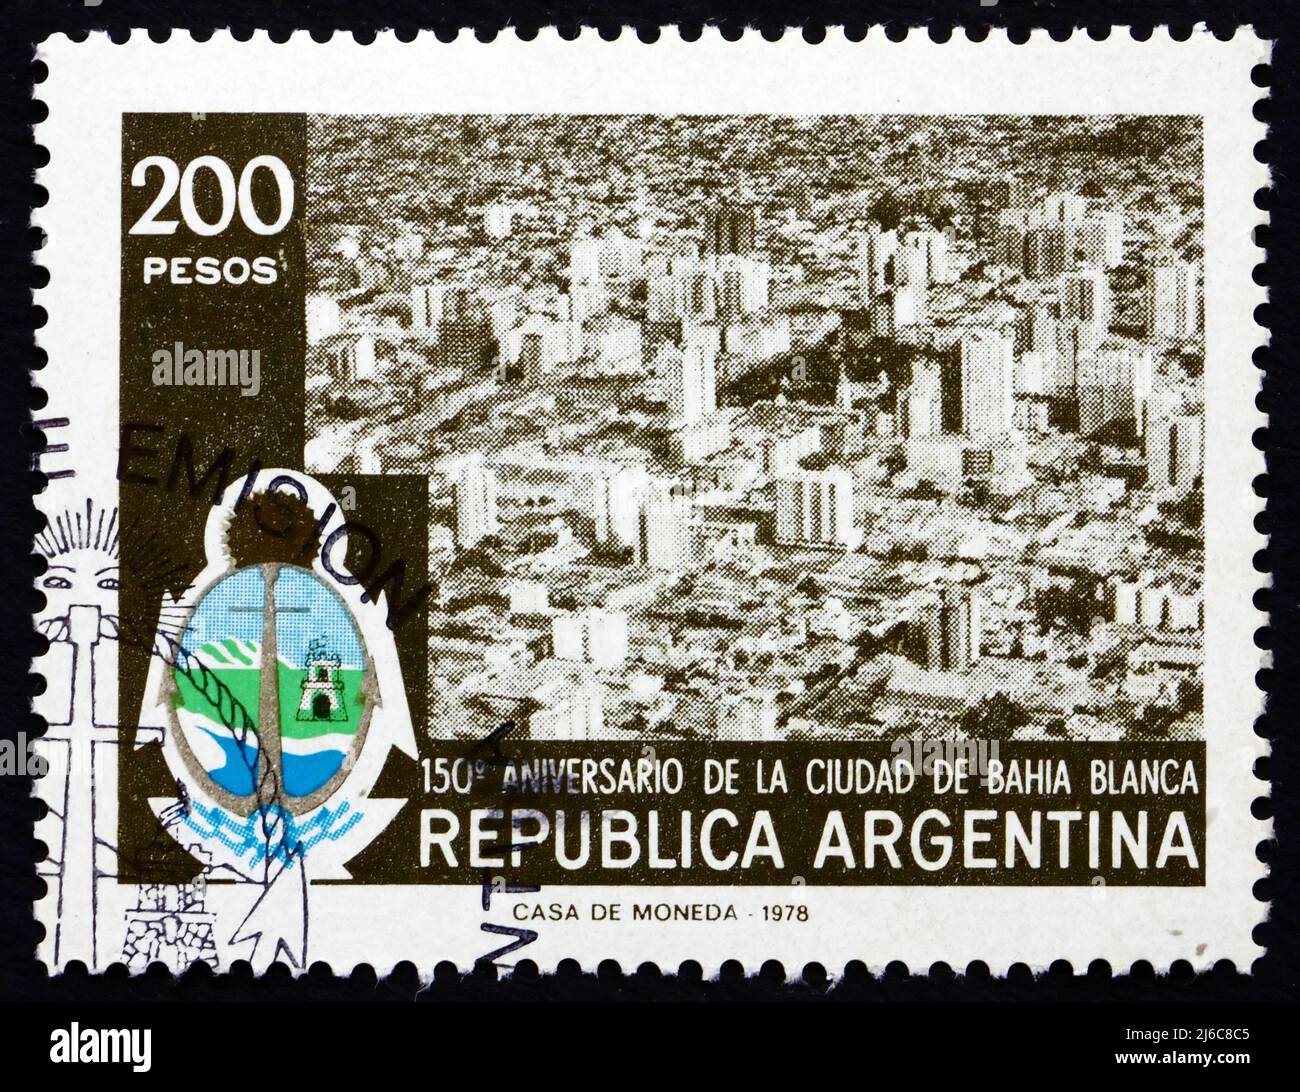 ARGENTINA - CIRCA 1978: a stamp printed in the Argentina shows View and Arms of Bahia Blanca, Sesquicentennial of Bahia Blanca, circa 1978 Stock Photo